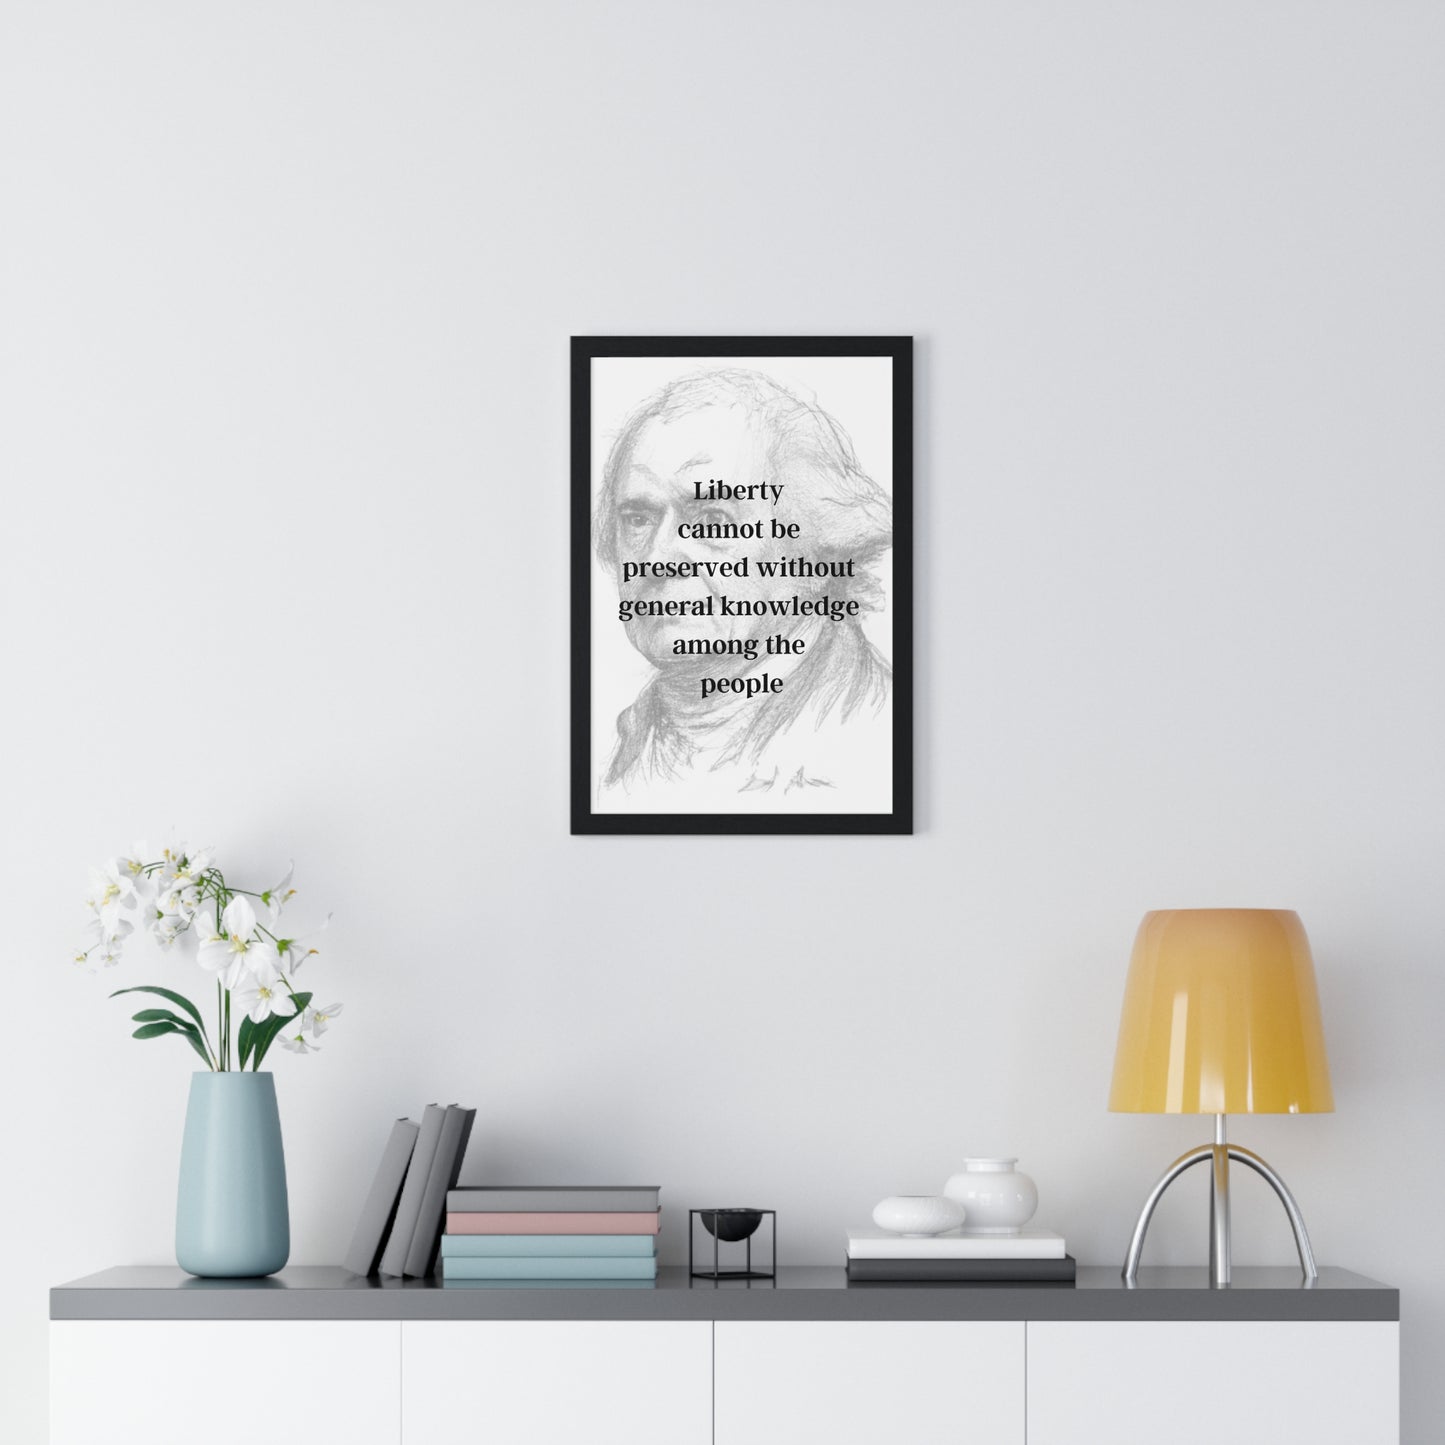 John Adams Quote 1, Poster Art, Light Print, 2nd President of the United States, American Patriots, AI Art, Political Art, Poster Prints, Presidential Portraits Presidential Quotes, Inspirational Quotes